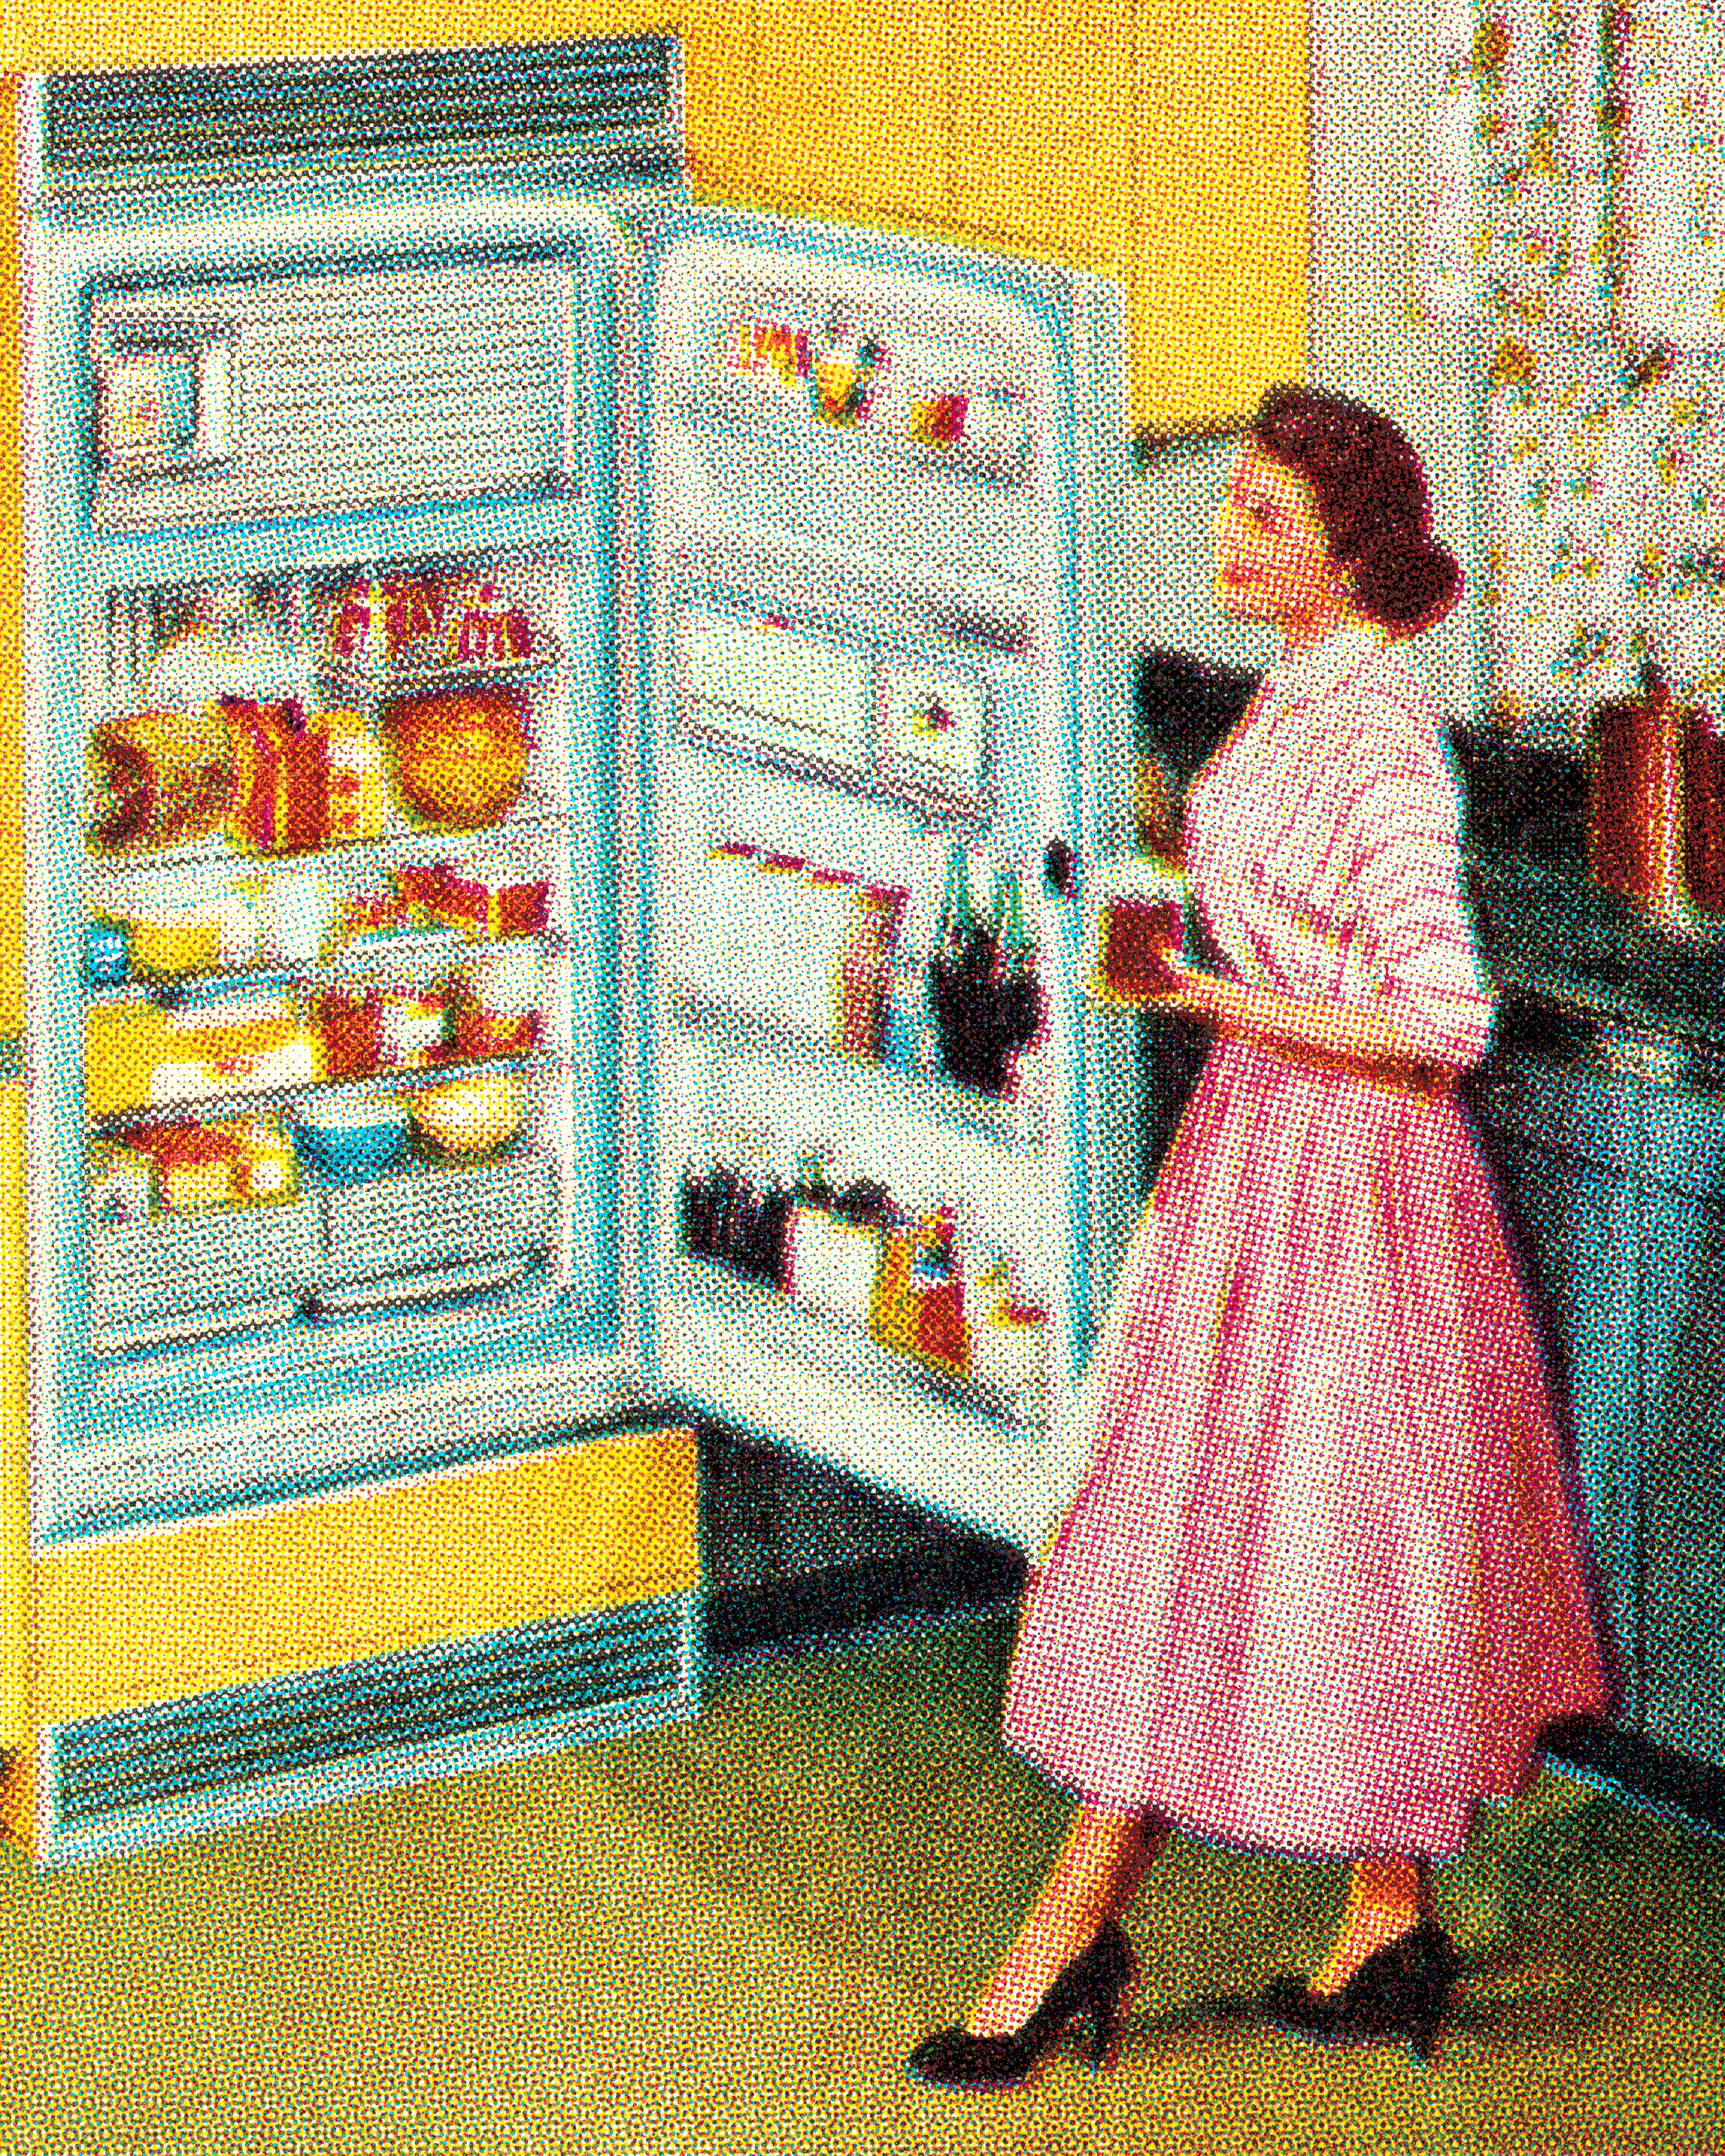 Woman at Open Refrigerator (Getty Images / Vetta)